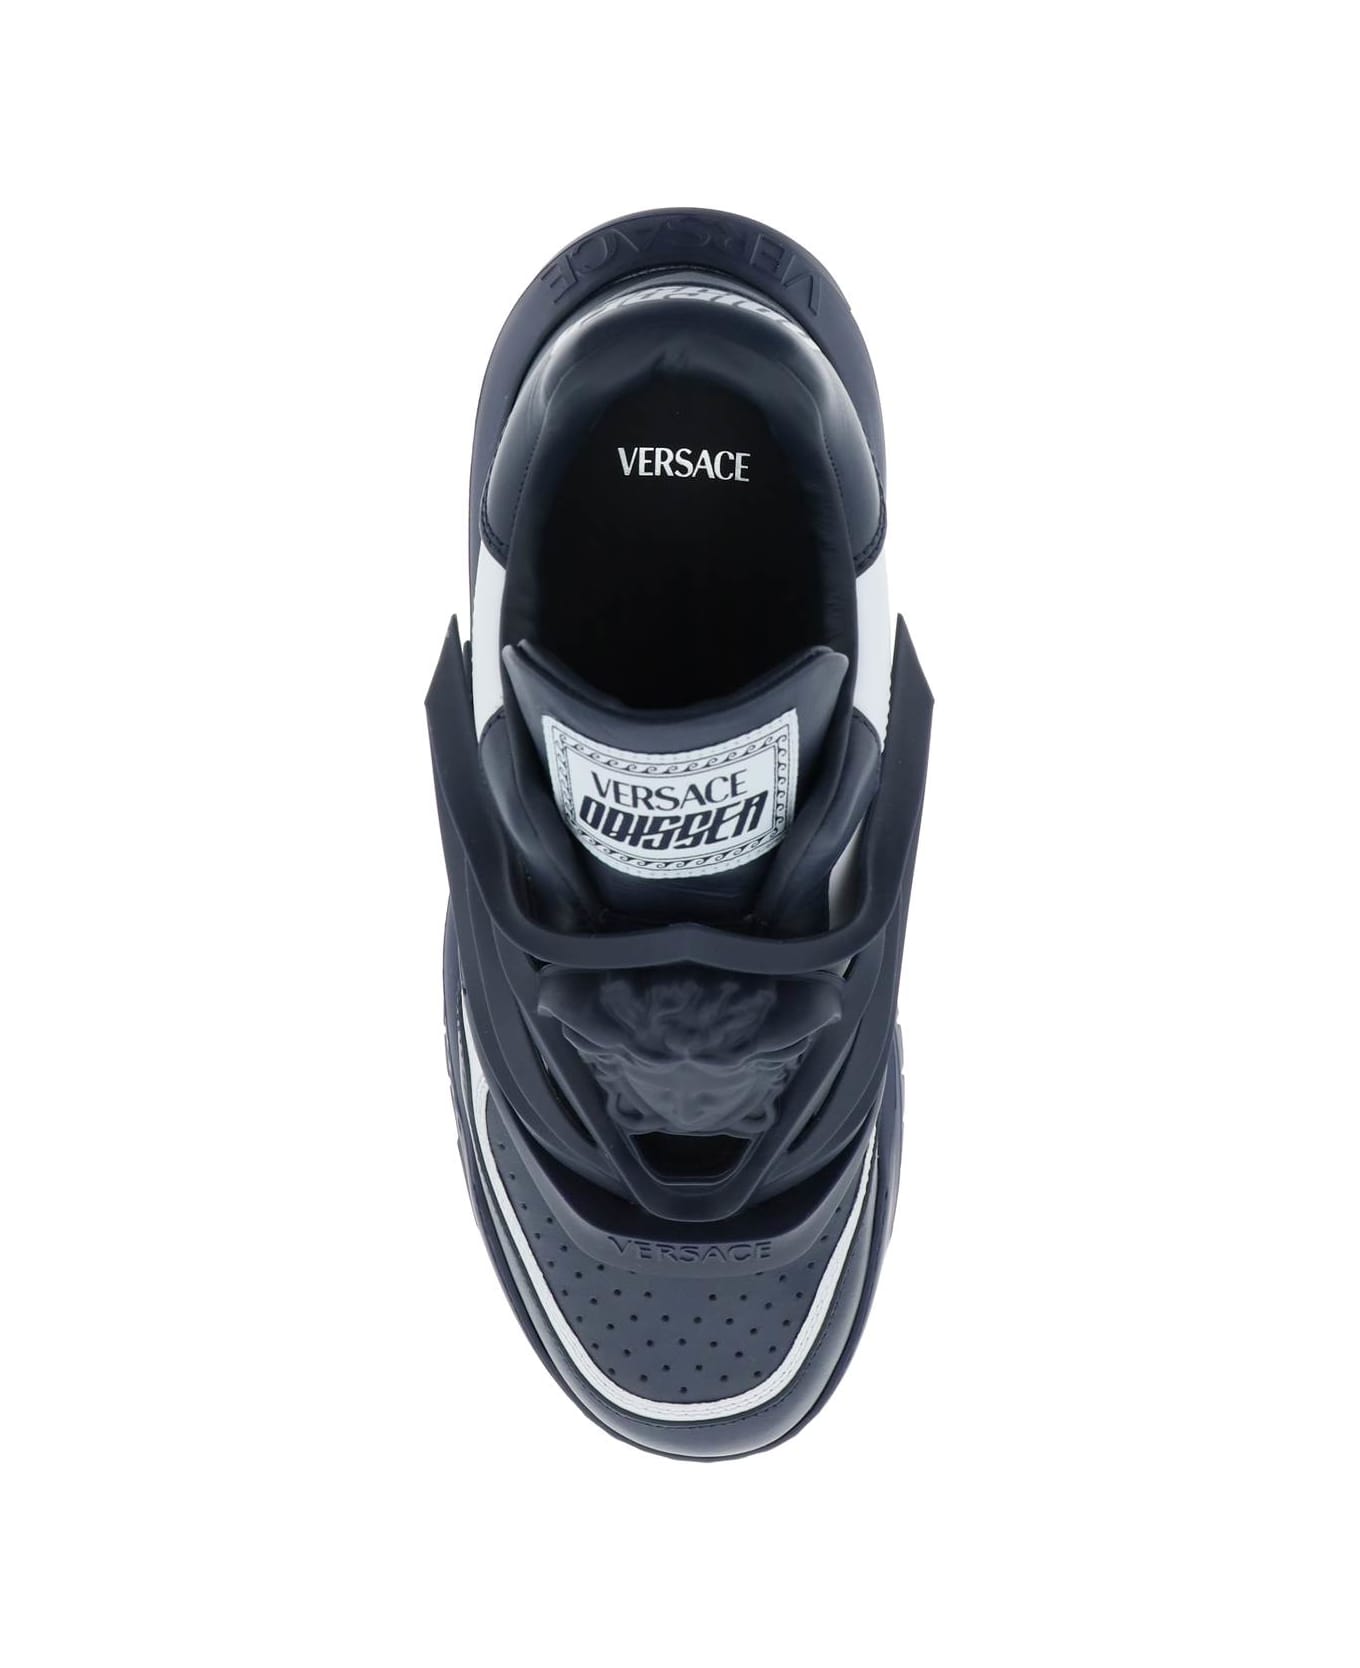 Versace Odissea Sneakers - BLUE NIGHT  WHITE (White) スニーカー